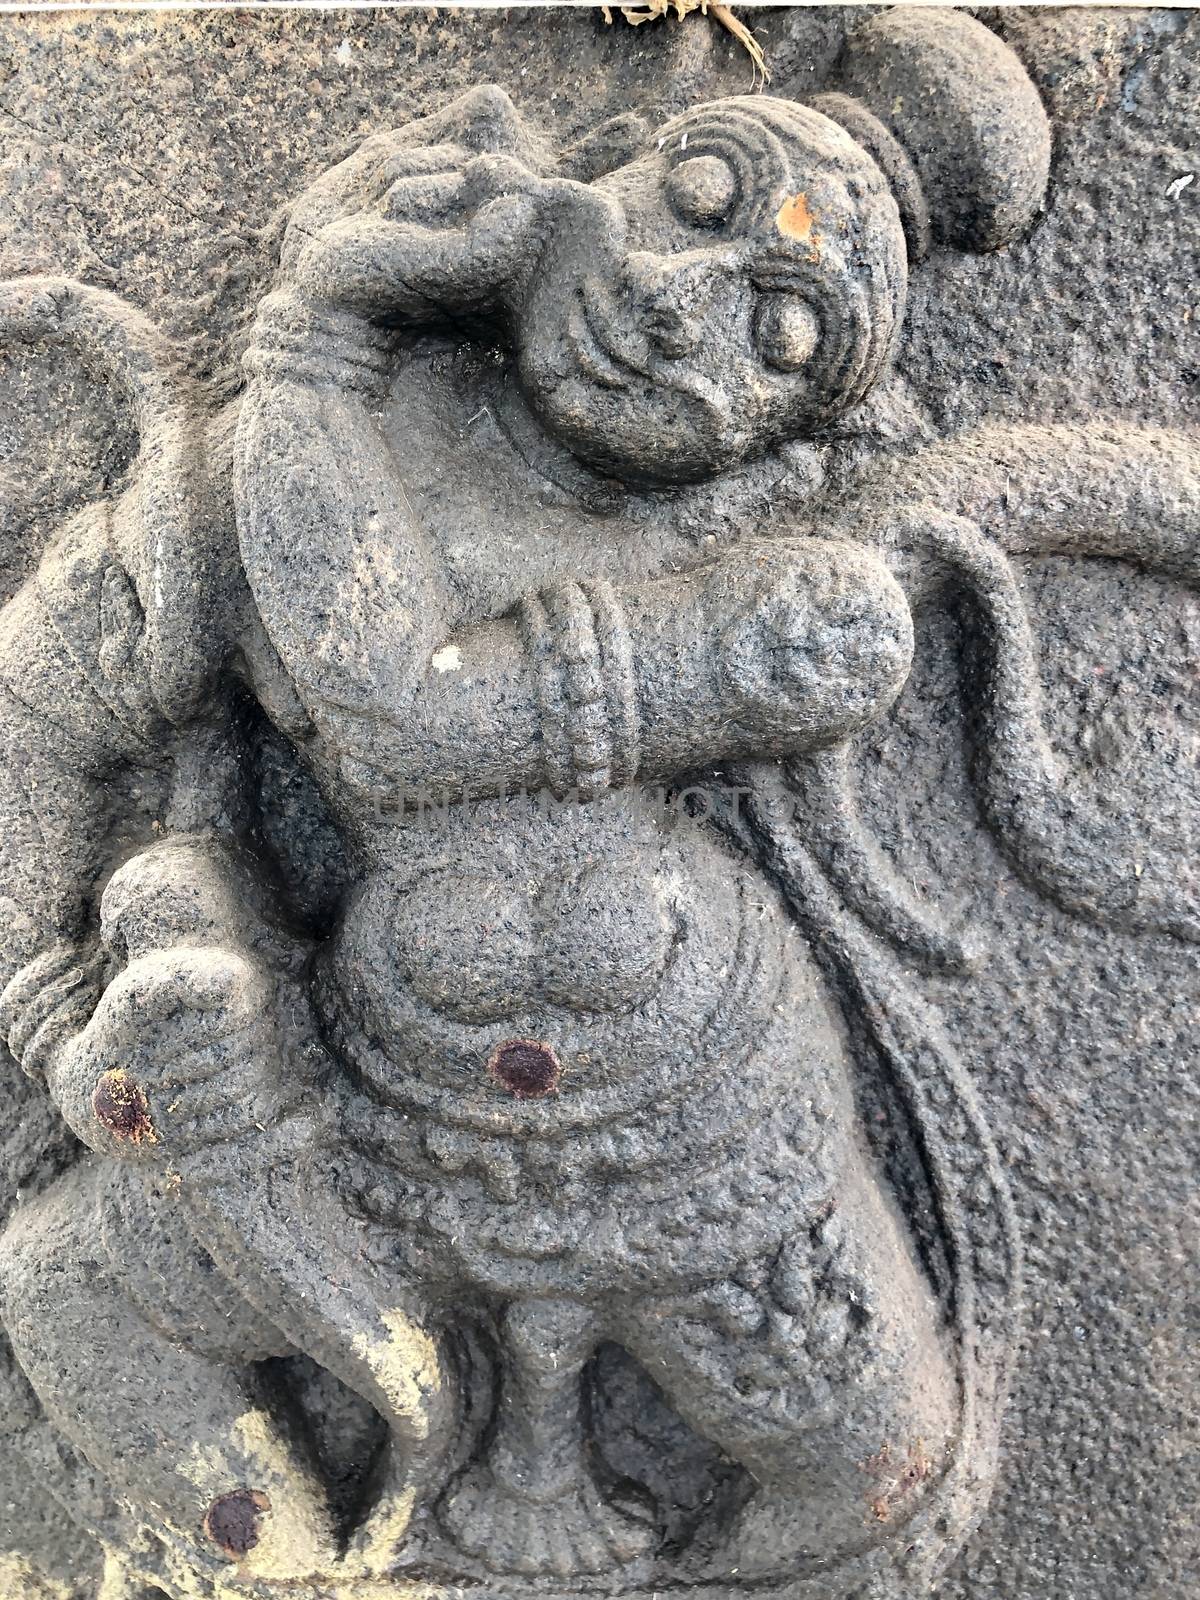 God statue with weapons in hand sculpture. Bas relief sculpture carved in the stone walls of Shiva temple, Tamil nadu by prabhakaran851